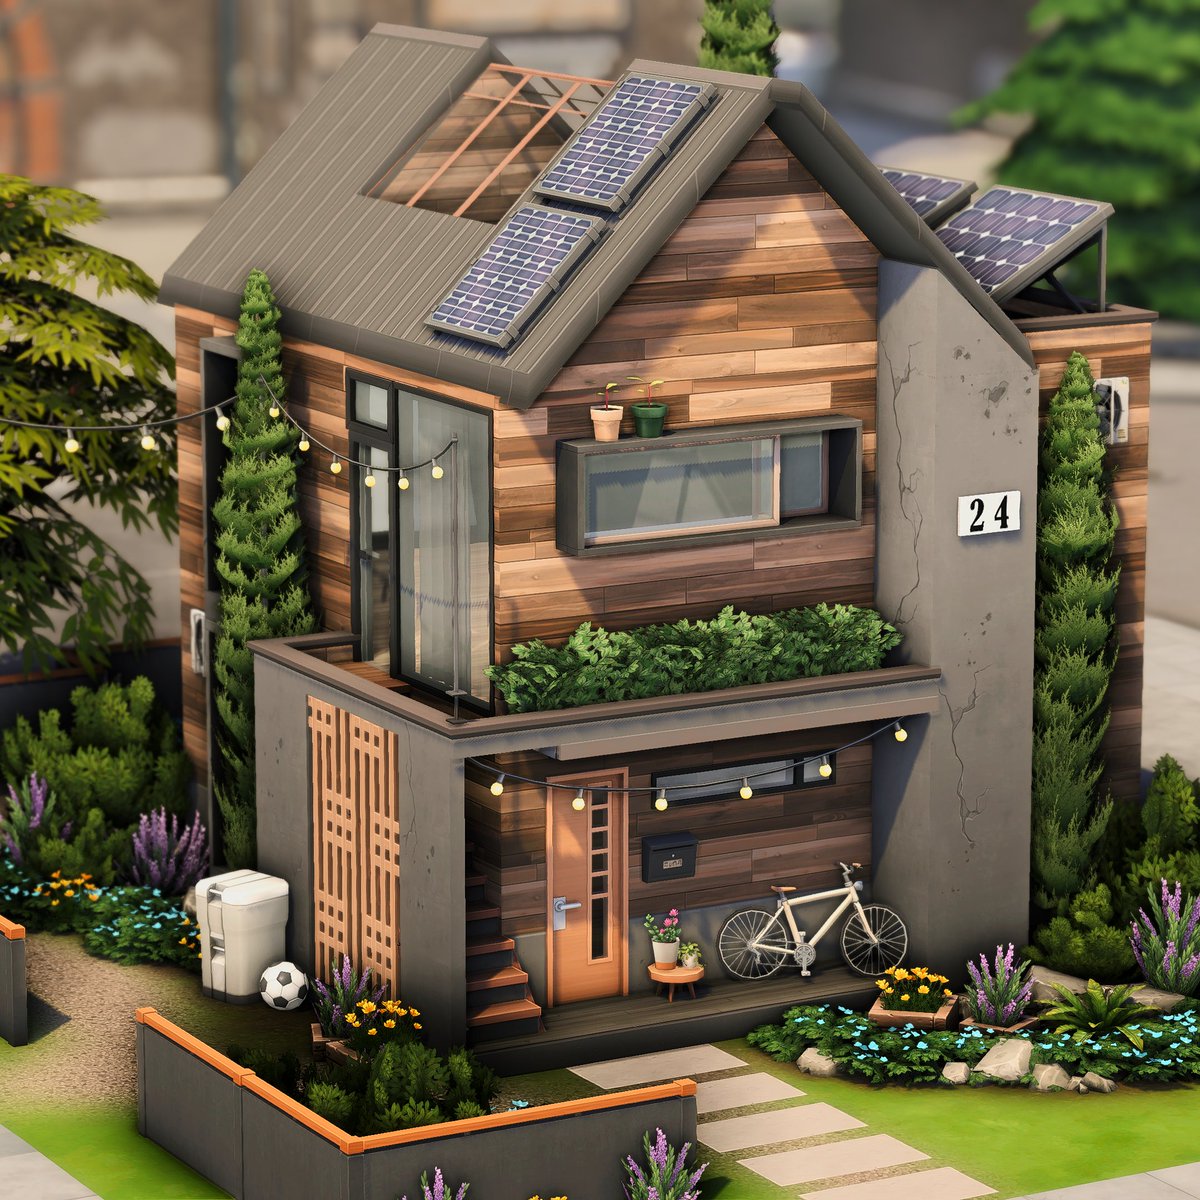 I made two Eco-Friendly Apartments in @TheSims🍃

Gallery ID: axiisims 

#TheSims4 #TheSims #Sims4 #Sims #EAPartner